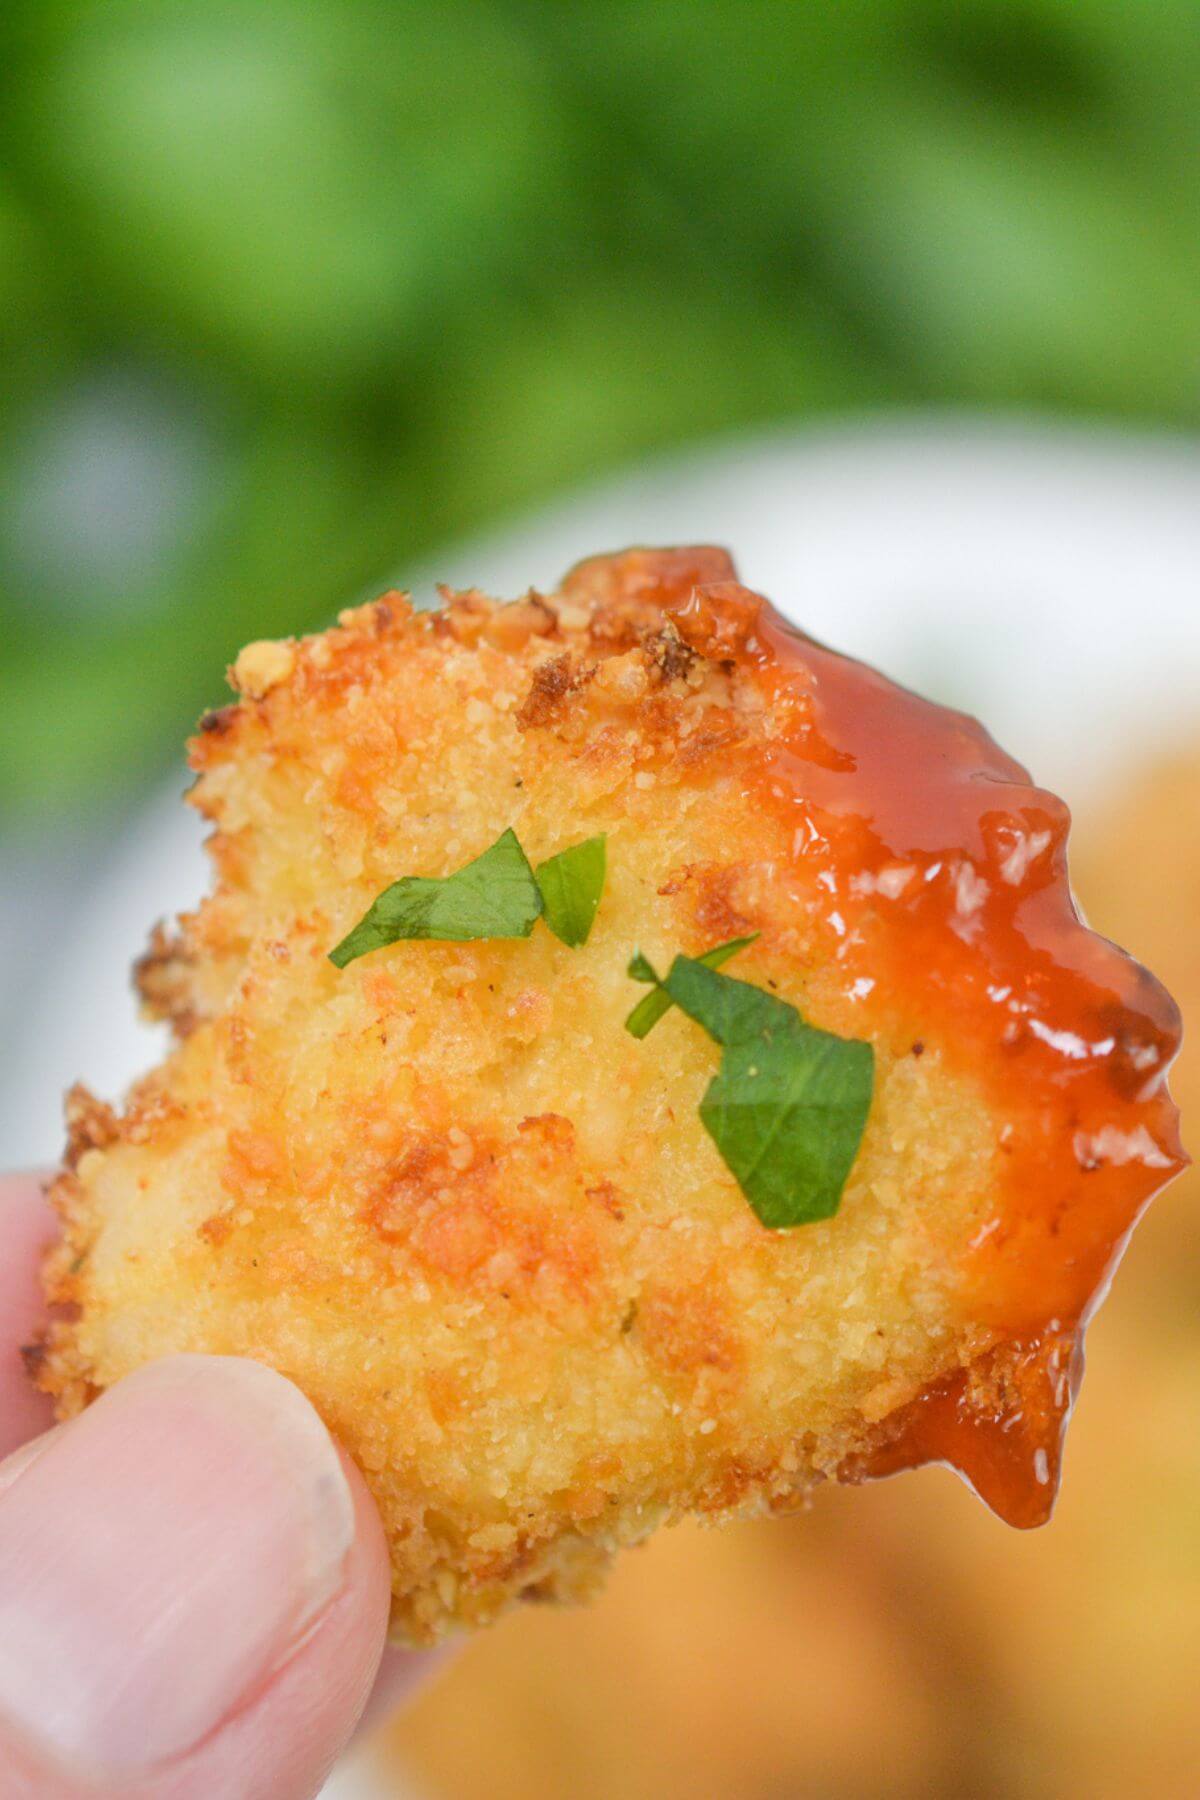 Chicken nugget dipped in barbecue sauce.